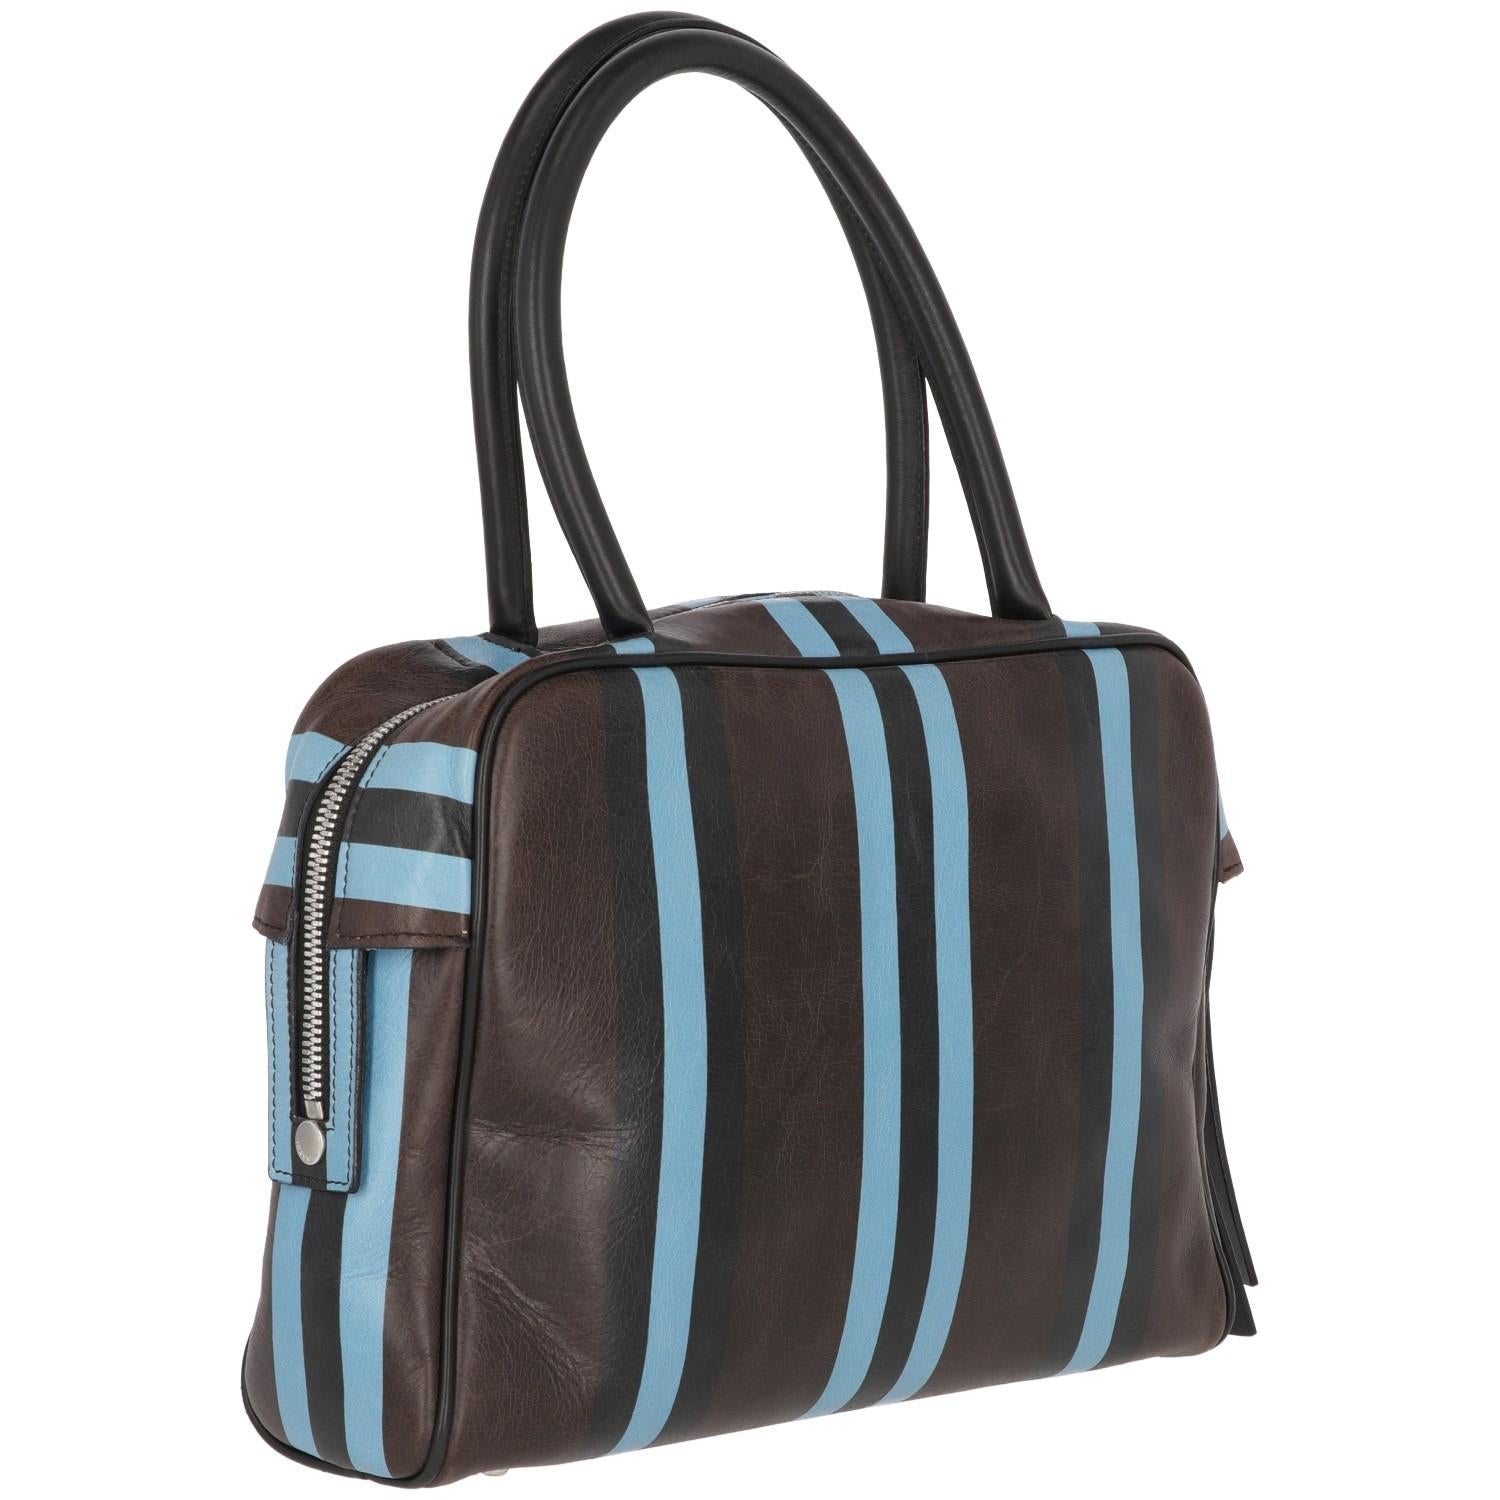 The elegant Marni dark brown leather handbag features a light blue and black vertical stripes, with two handles, zip fastening, with beige cotton lining and inner pockets. 

Years: 2000s

Made in Italy

Width: 31 cm
Height: 23 cm
Depth: 8 cm
Handle: